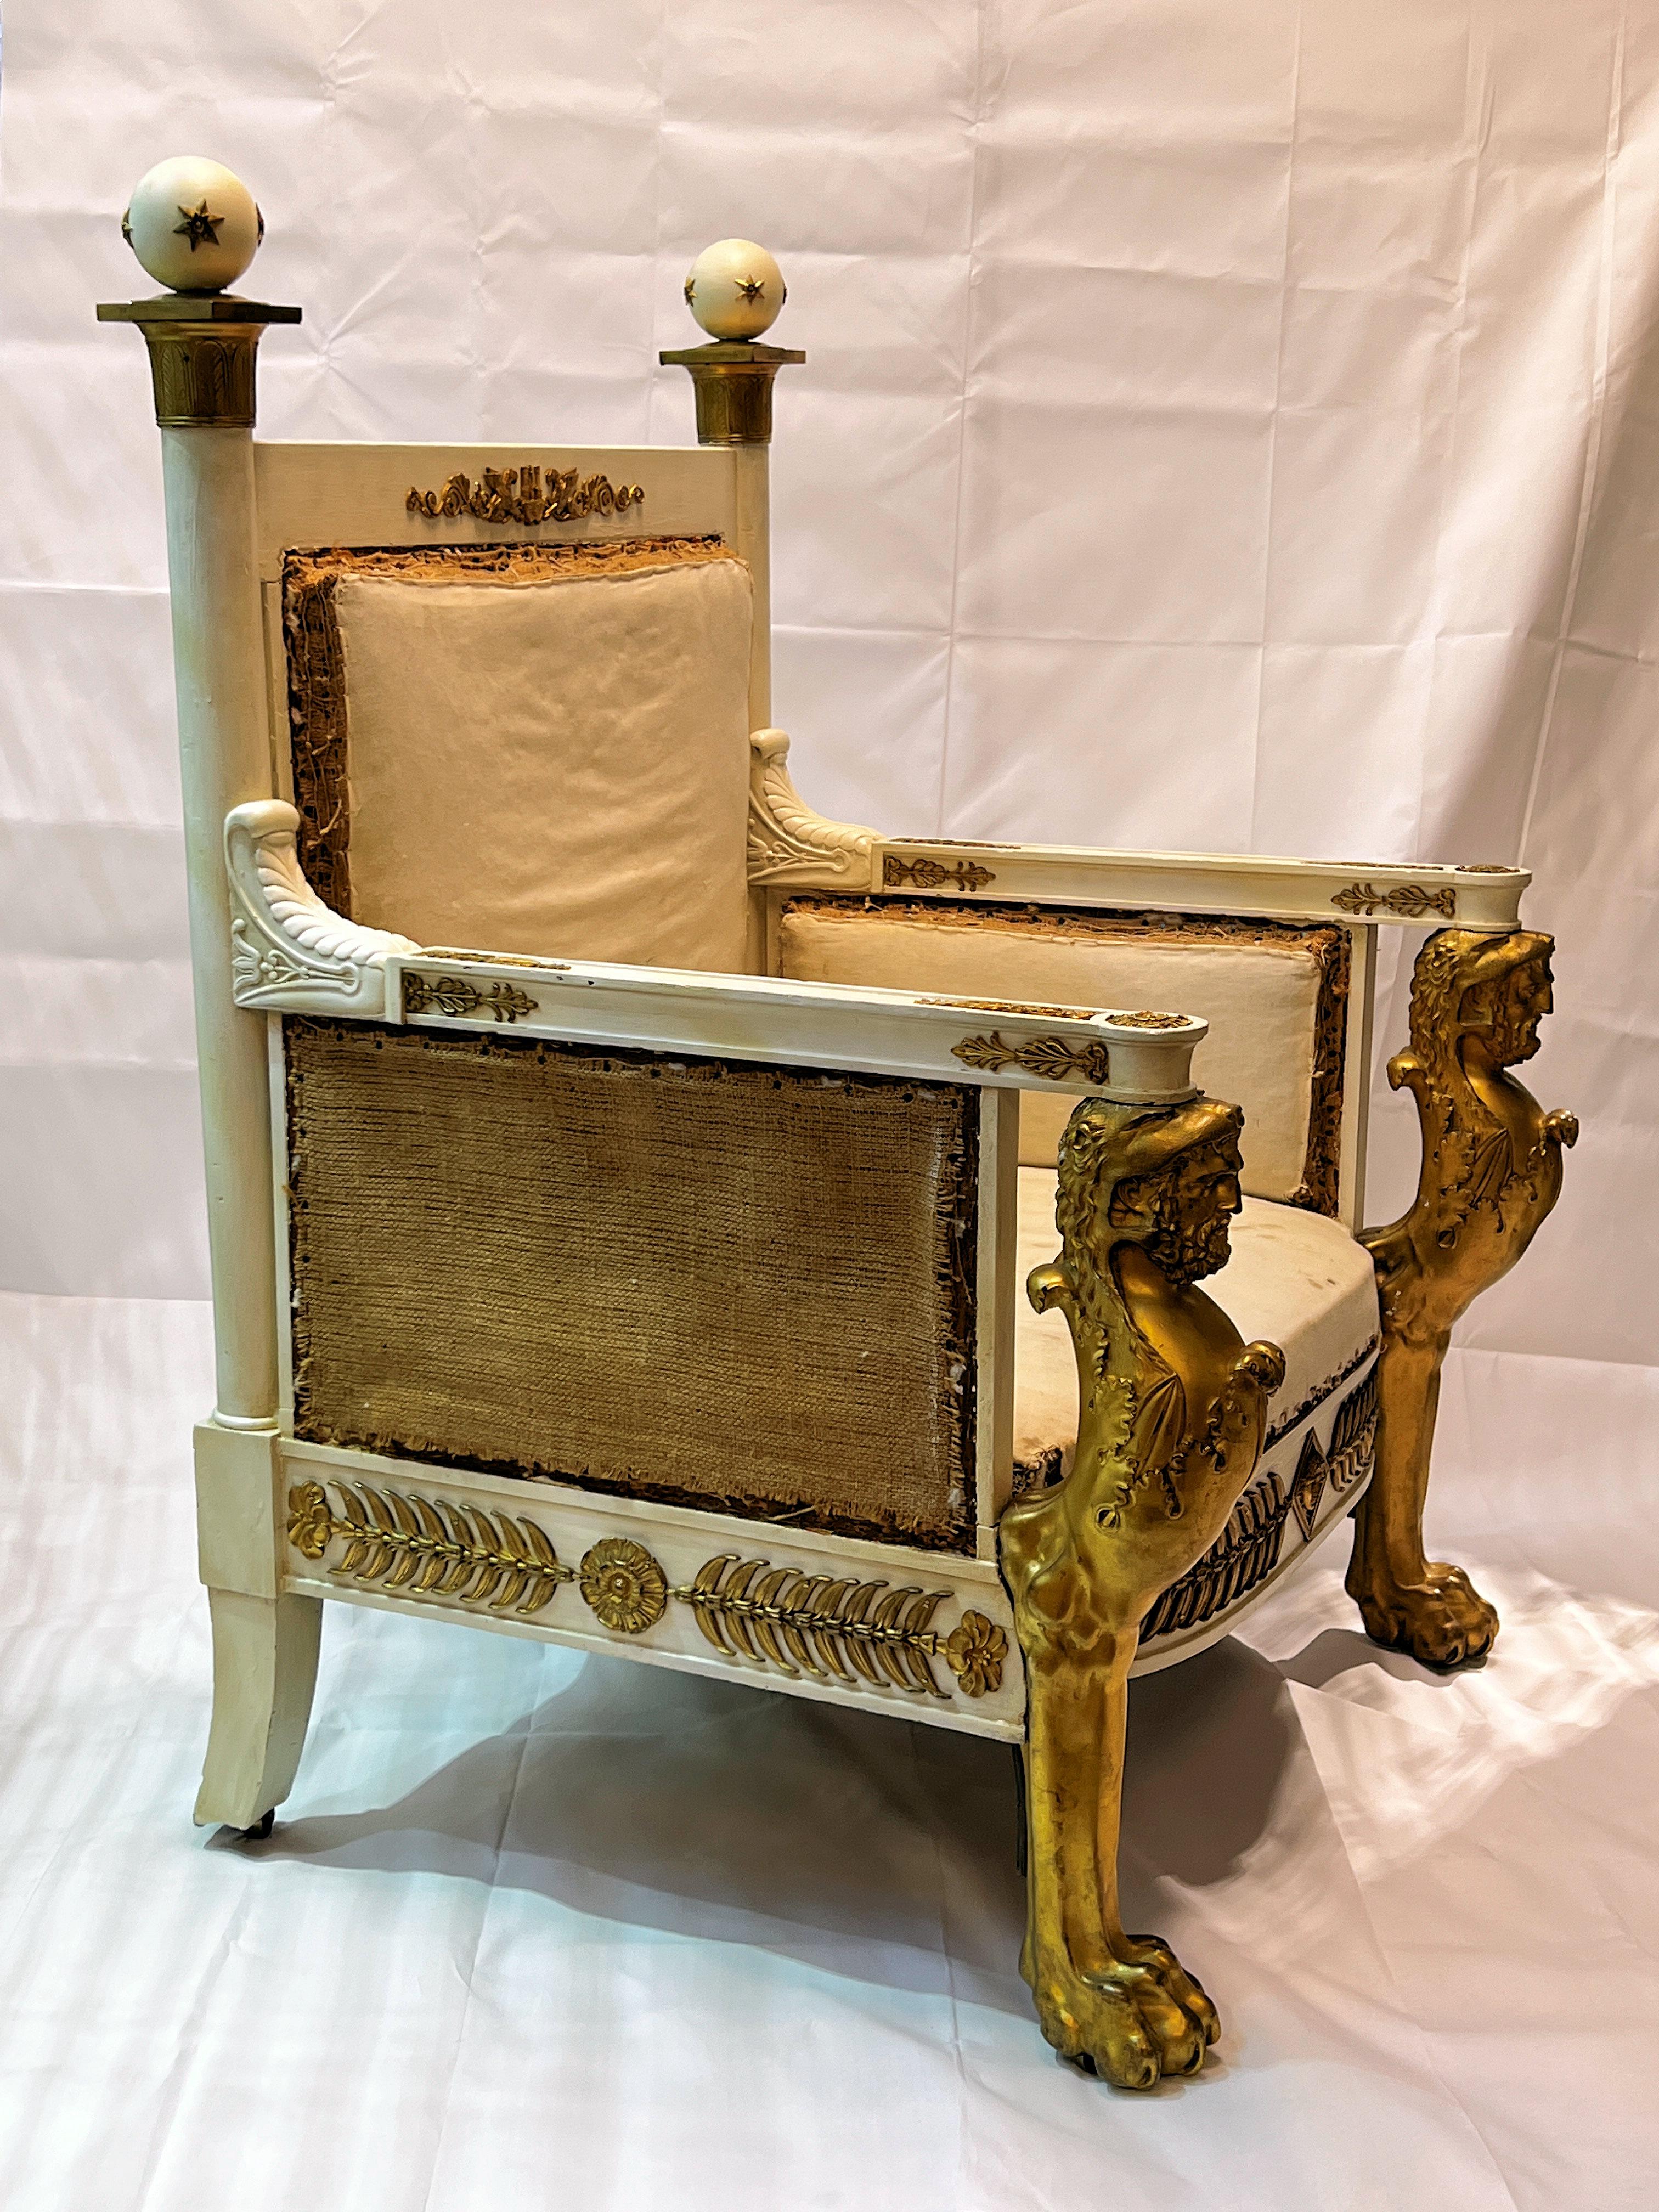 Empire Revival French Empire Throne Chair After Jacob-Desmalter